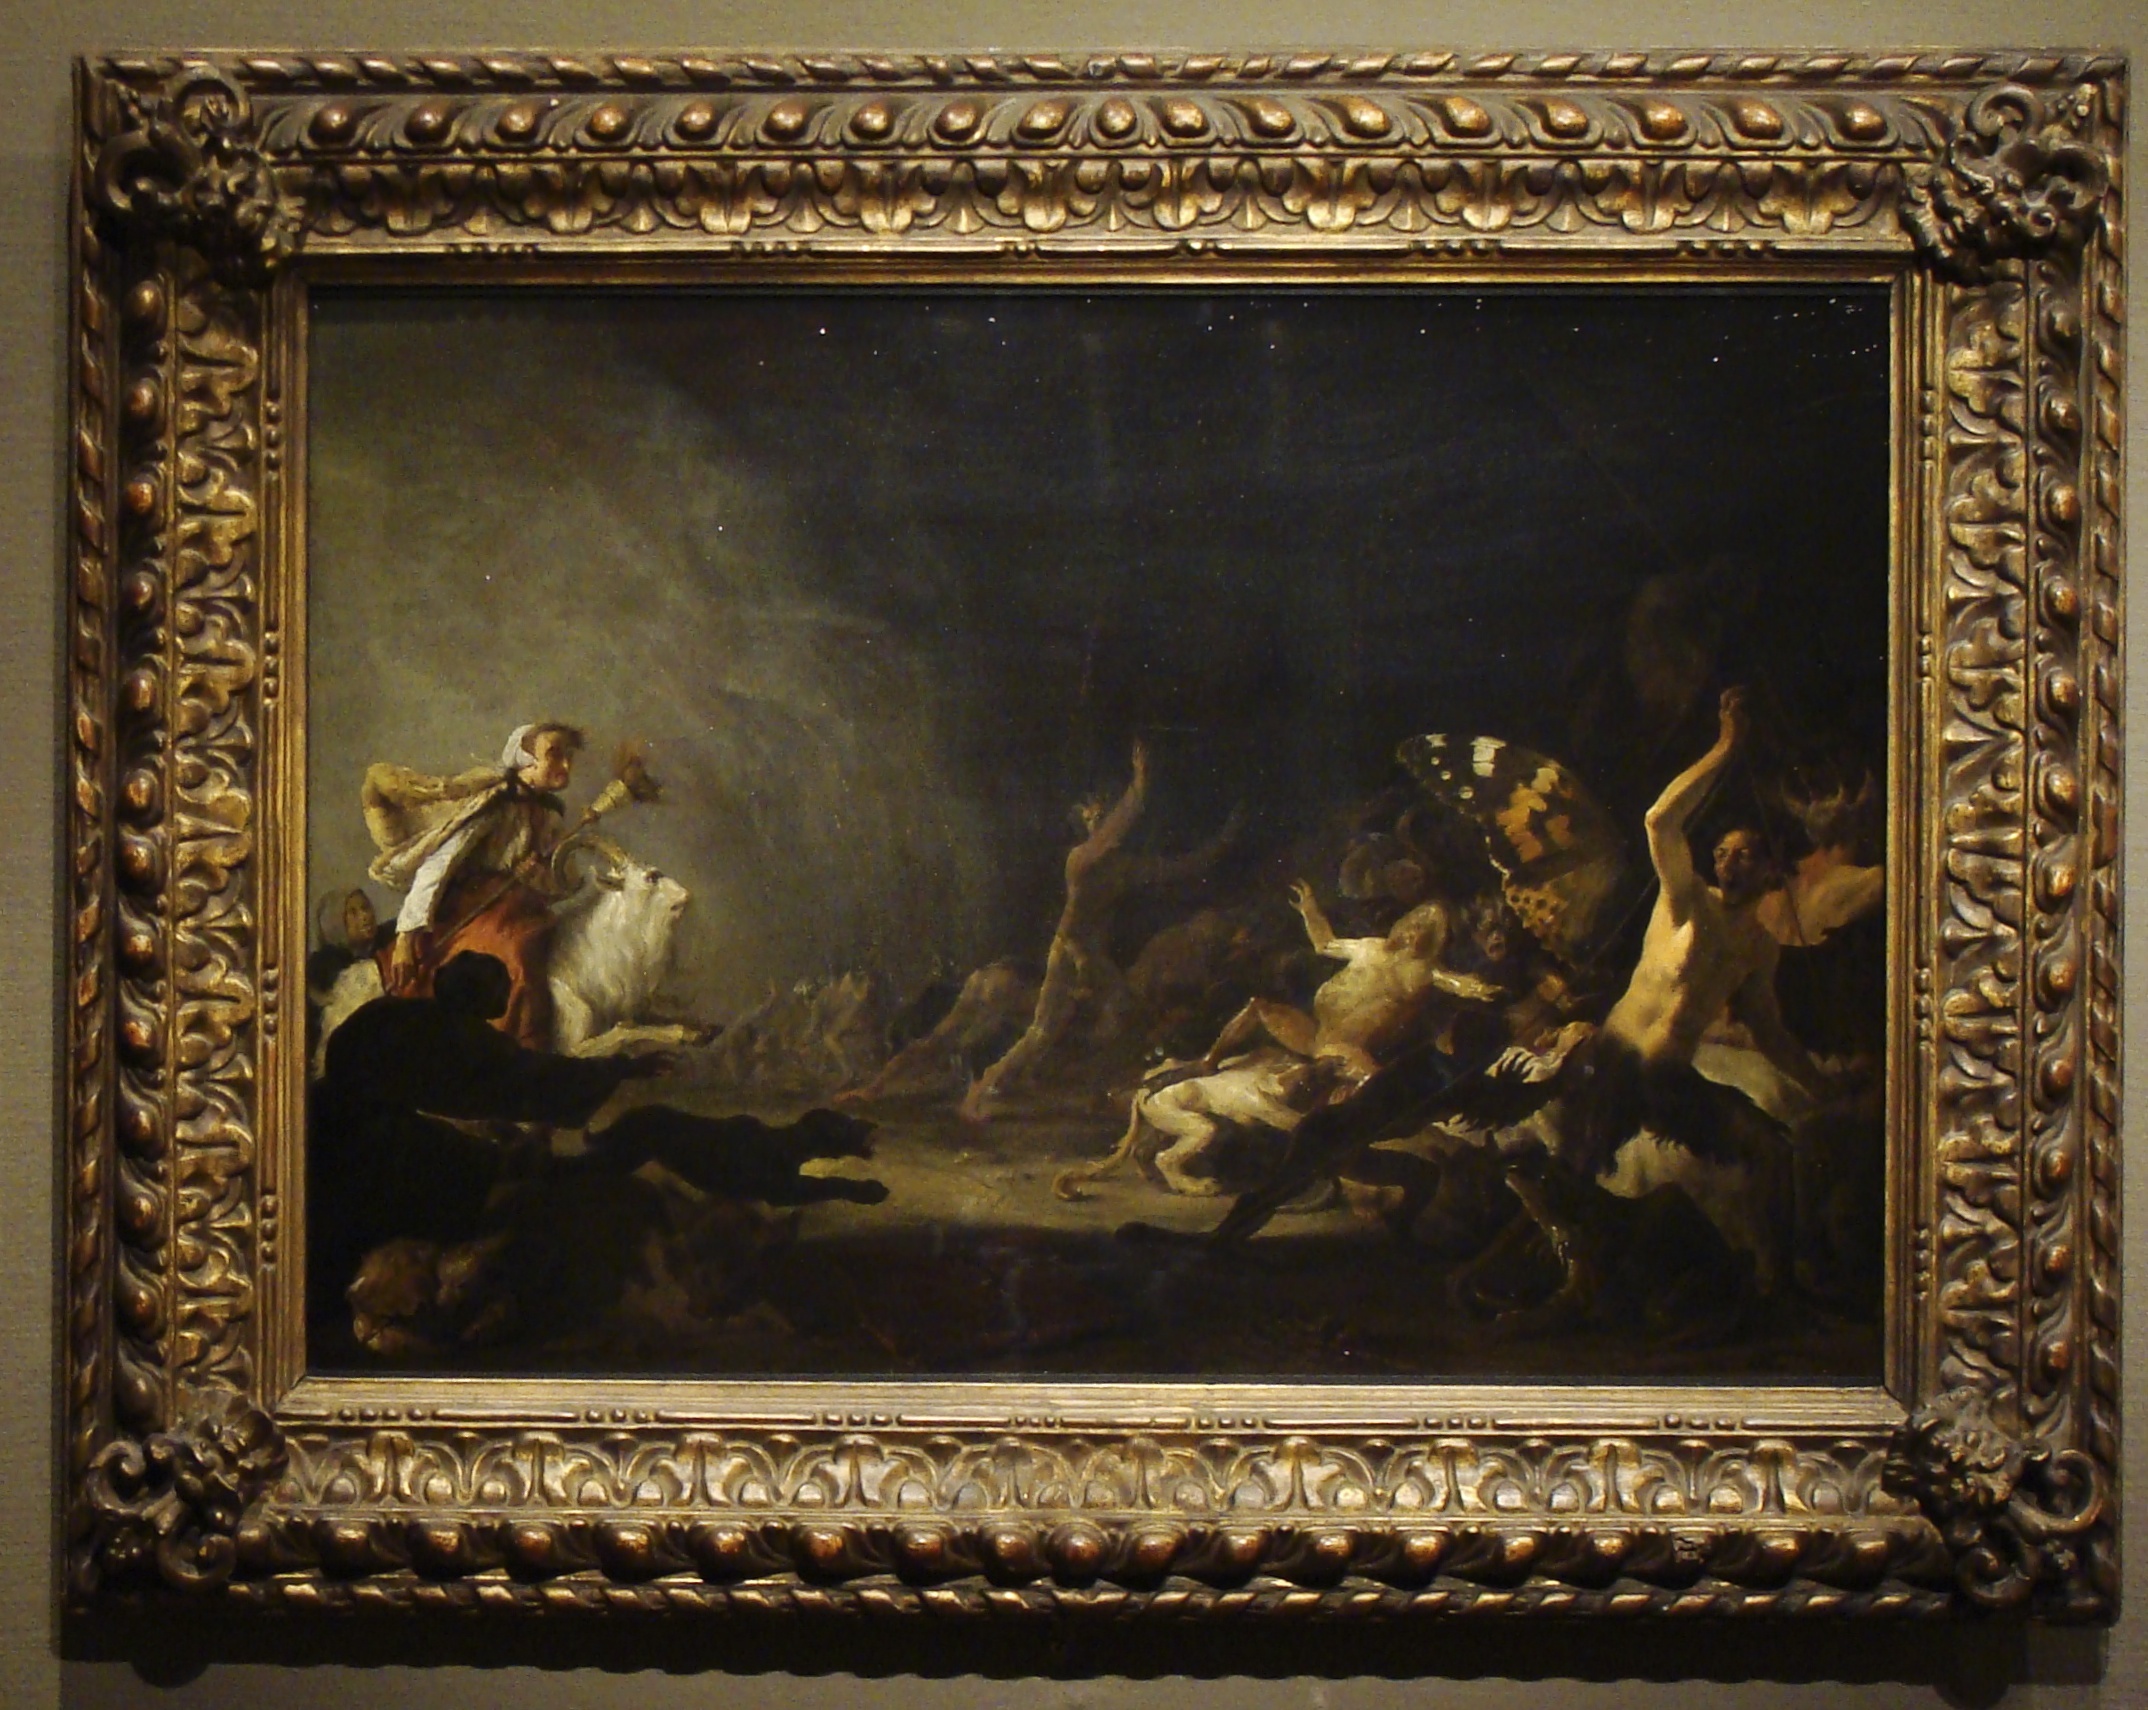 a painting depicting a group of people in a dark room